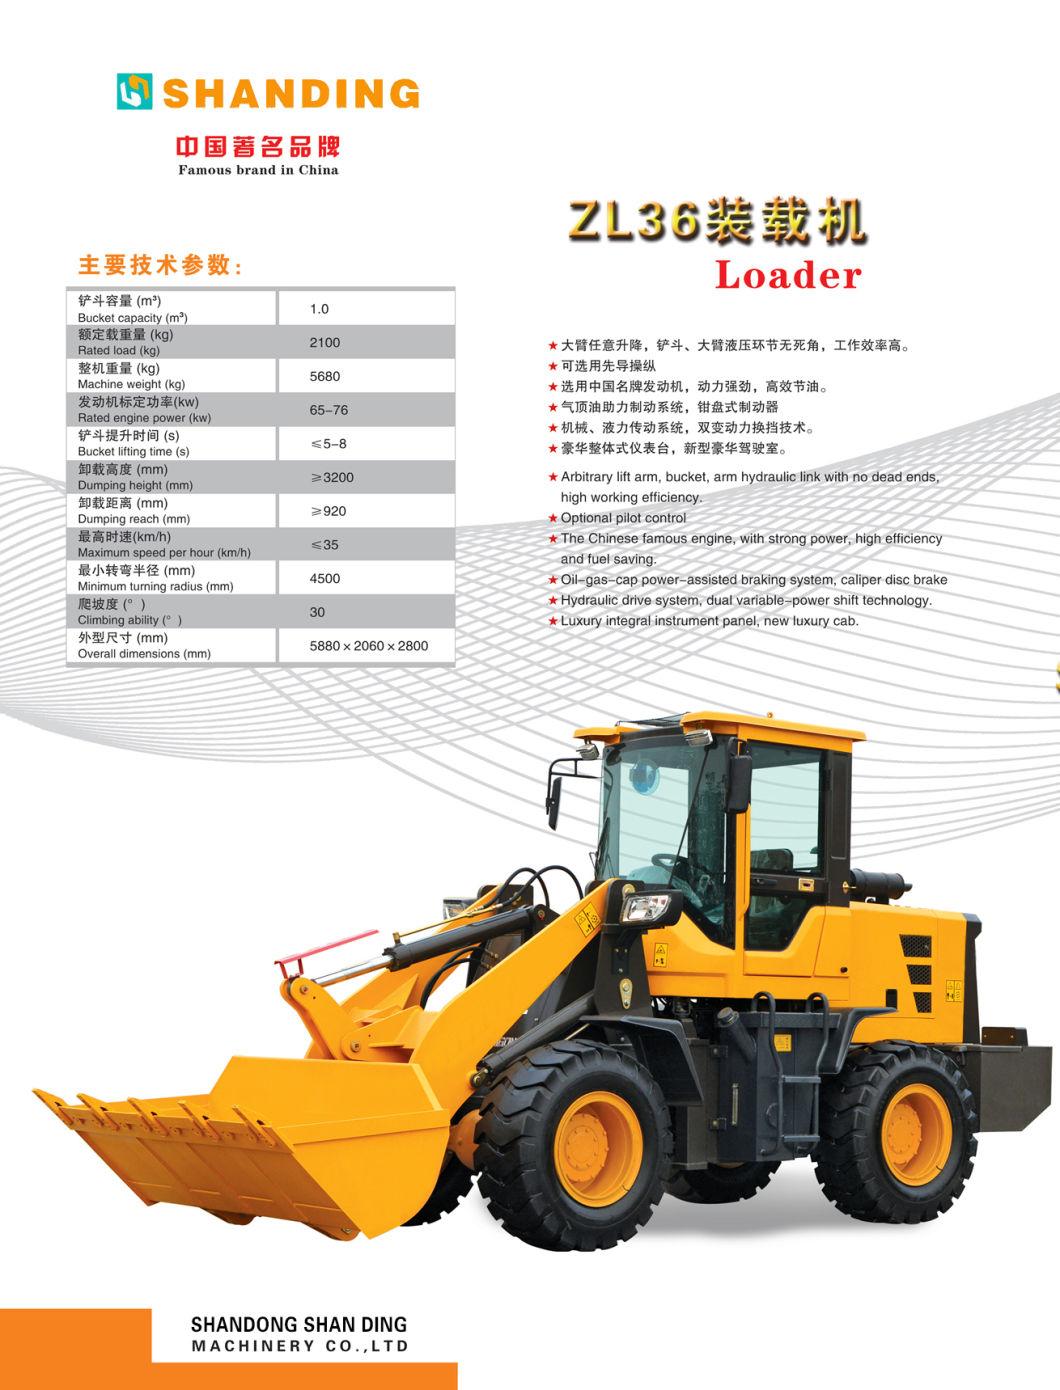 Shanding Zl36 Cheap Front End Wheel Loader for Sale Small Loader 2 Ton Wheel Loaders